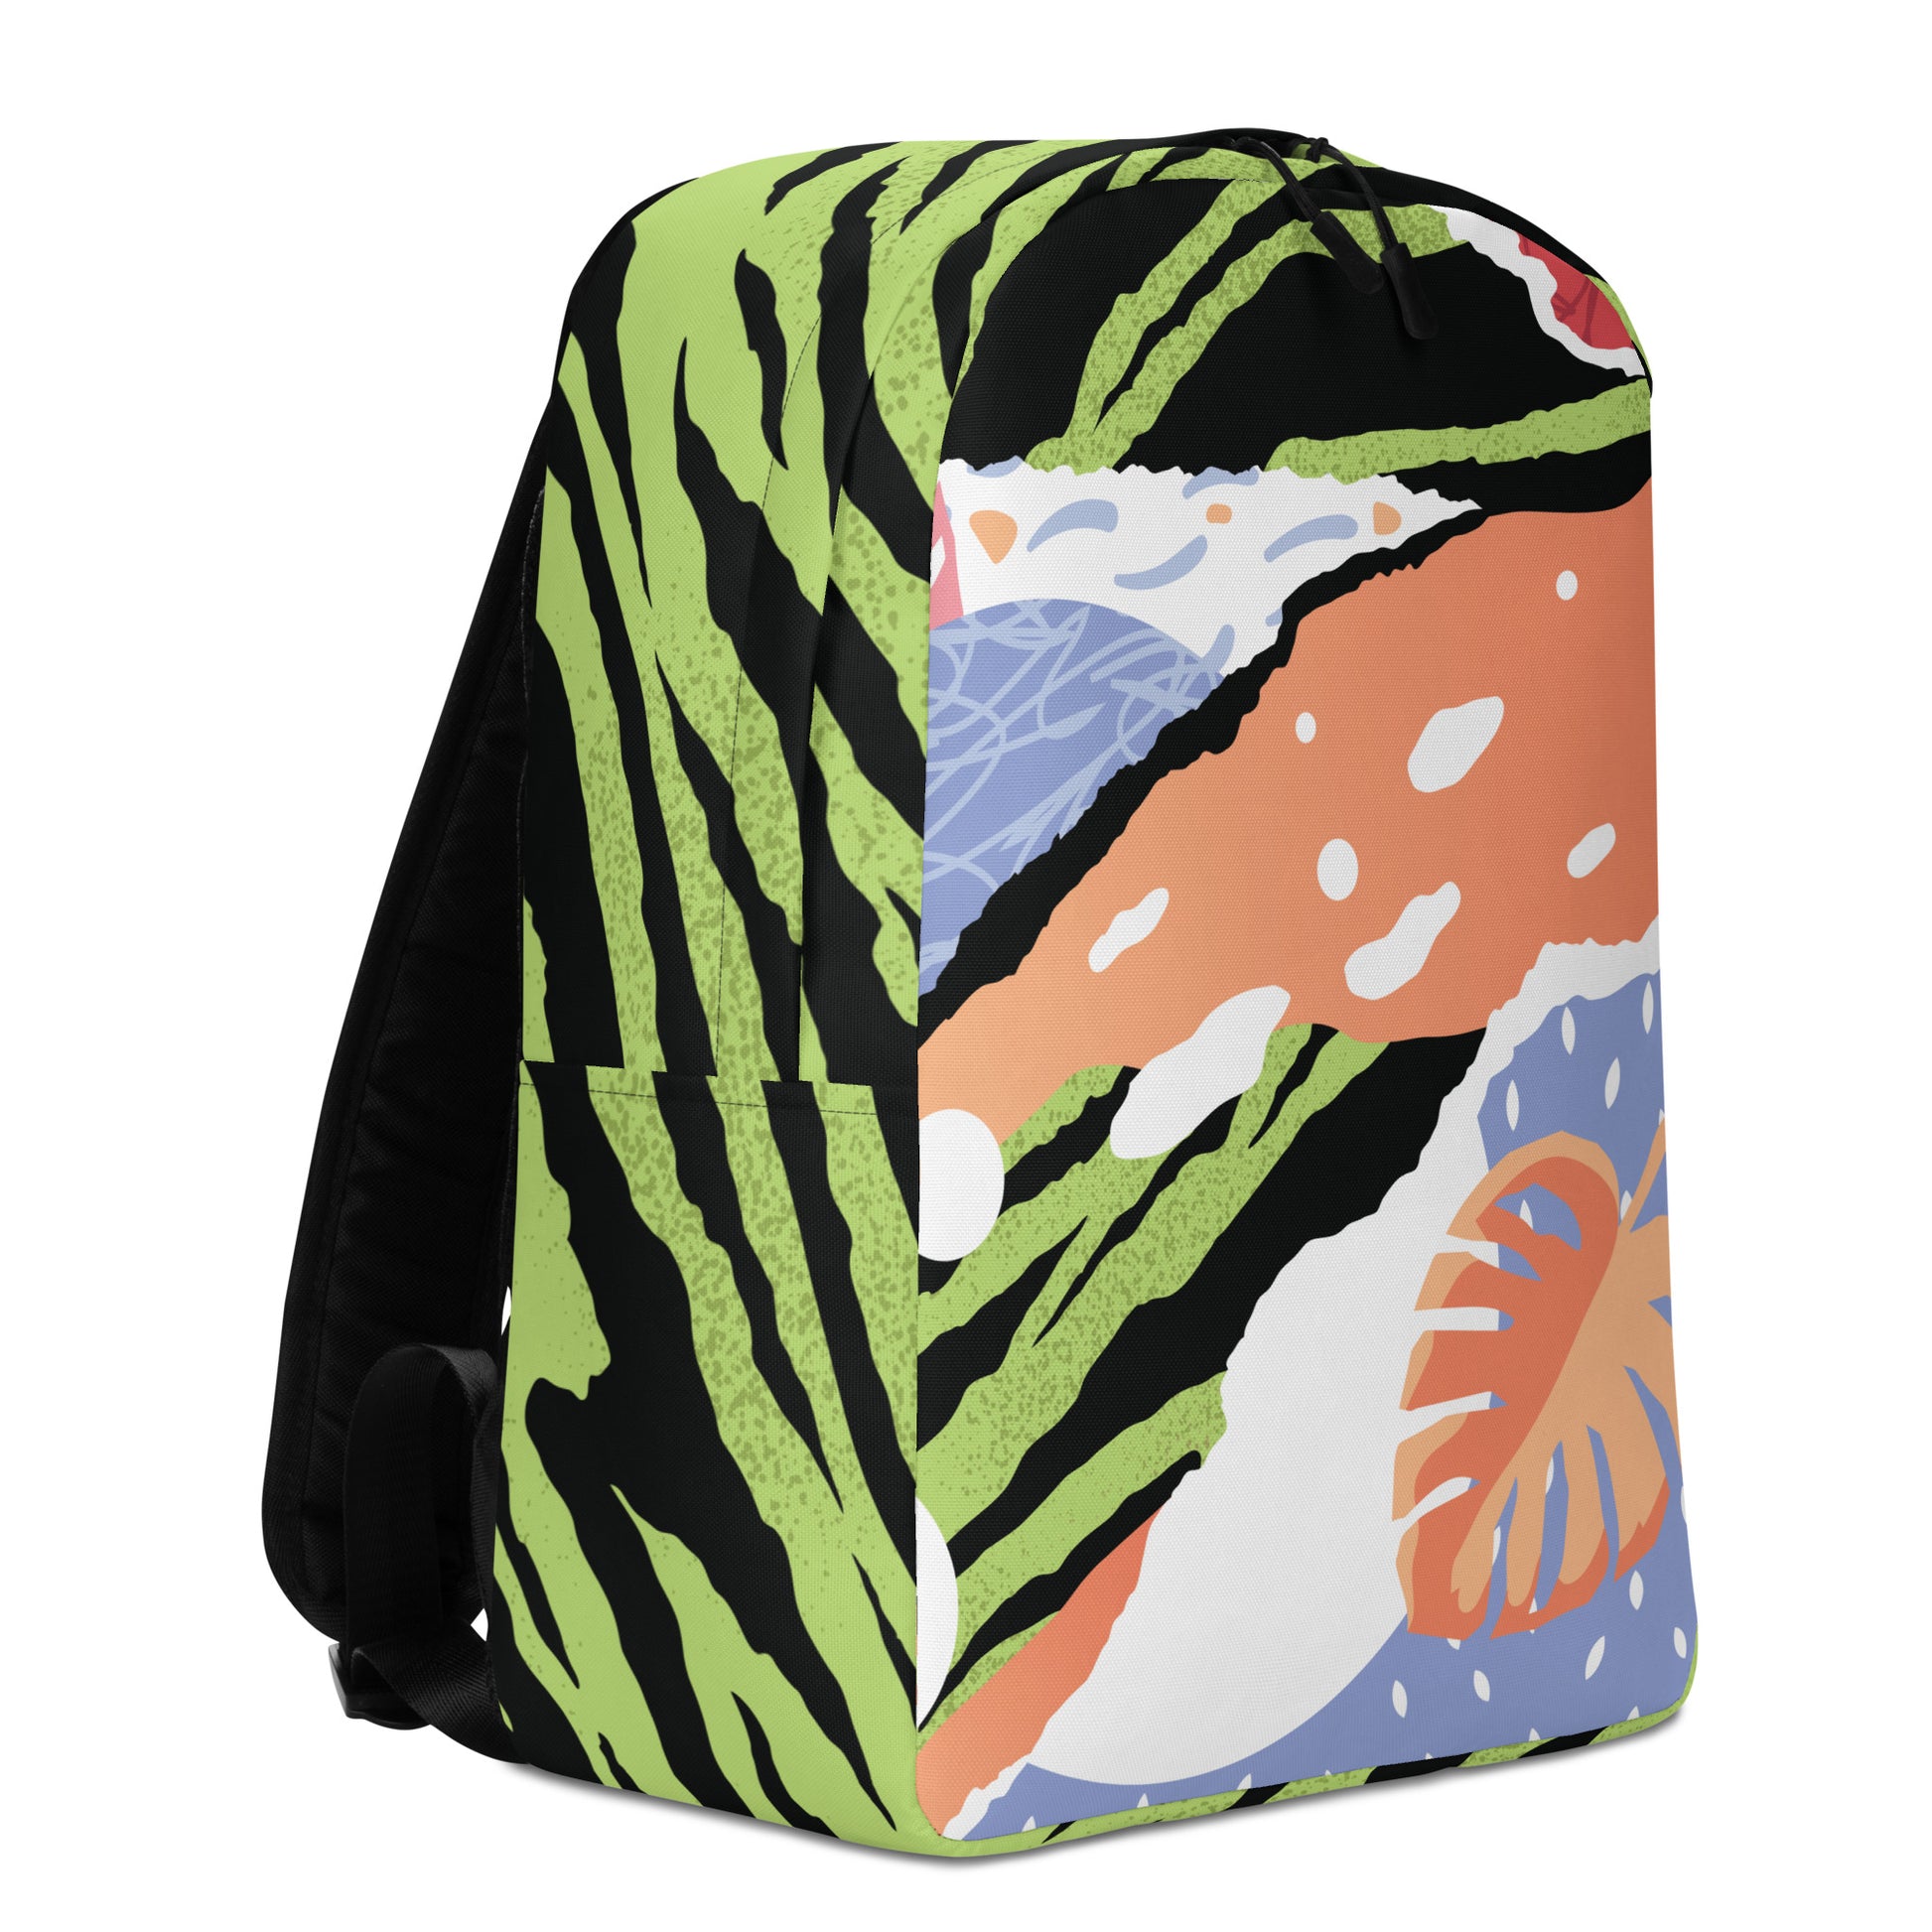 Tropical pop art minimalist backpack seen from the side